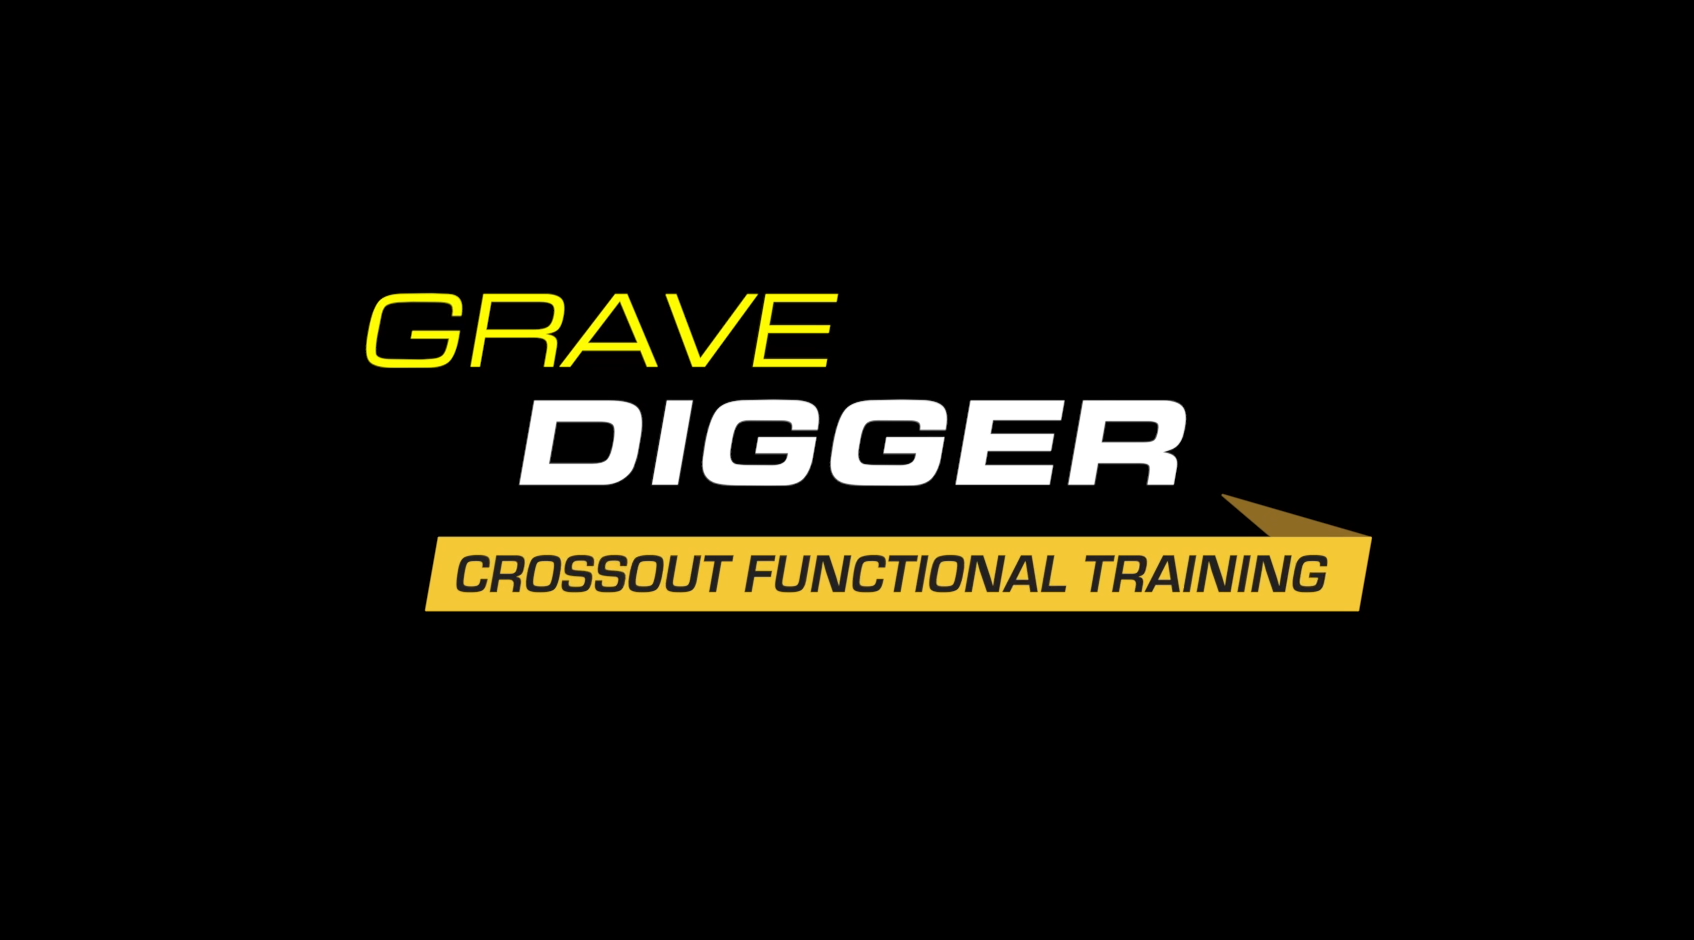 Grave Digger Crossout Functional Training